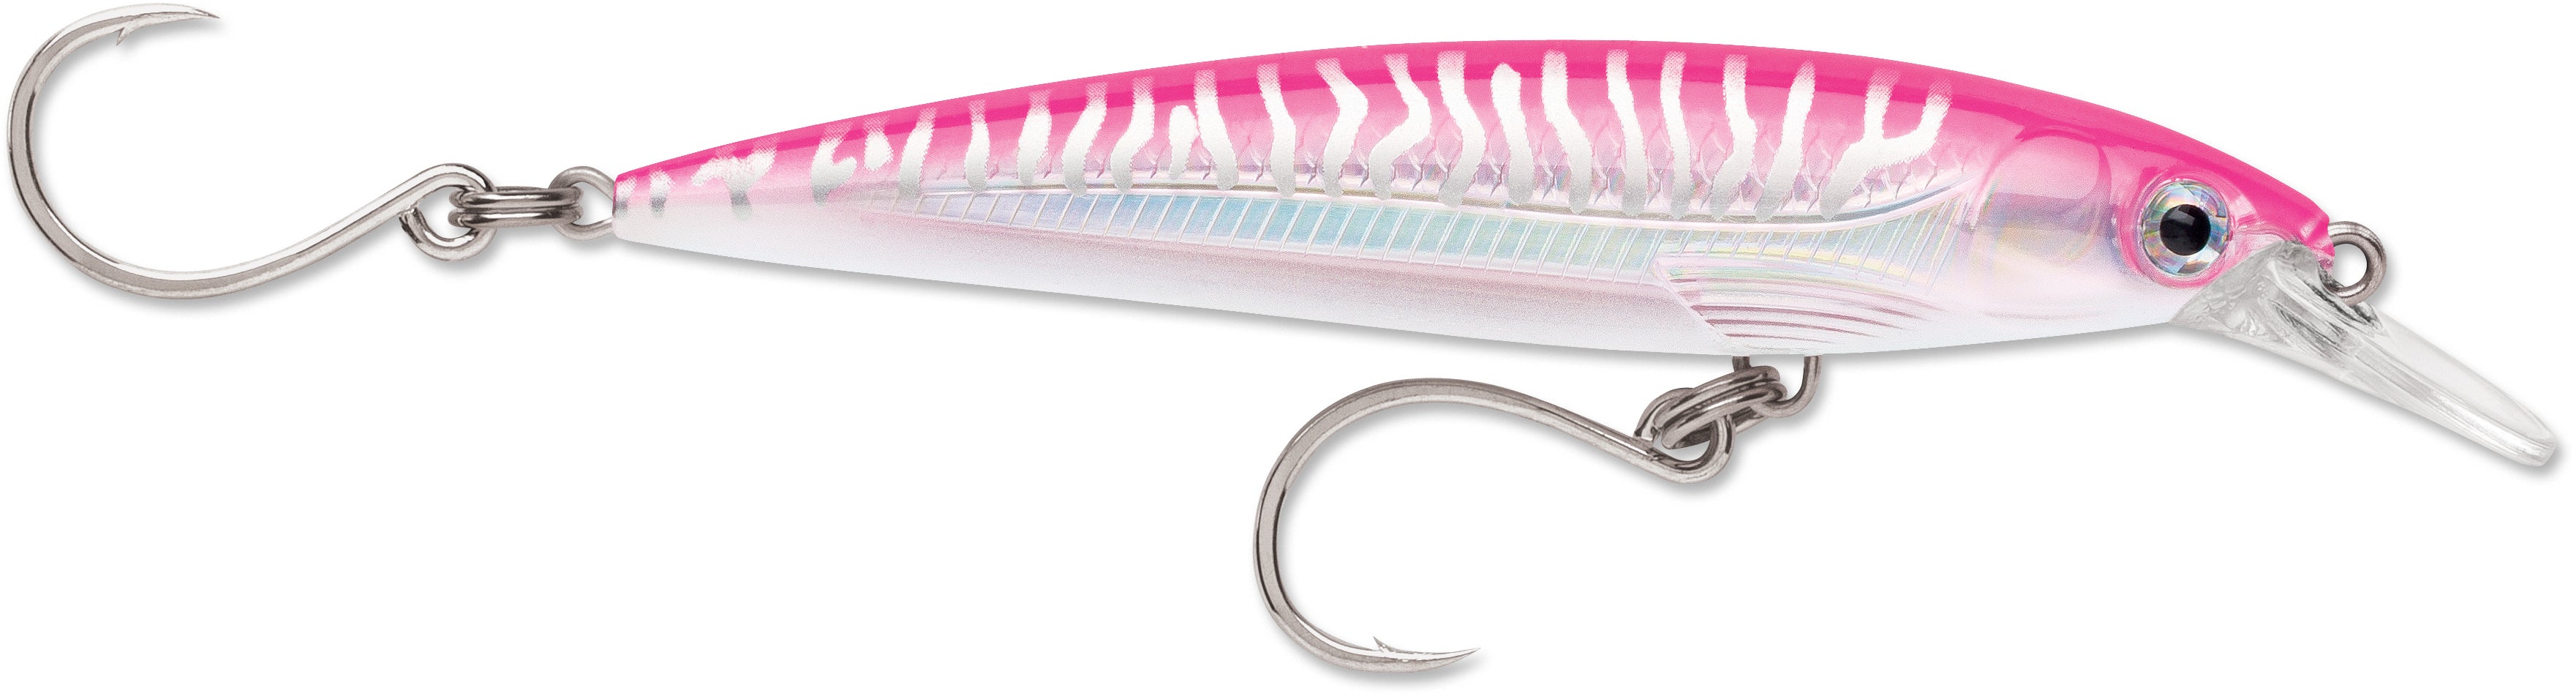 Rapala Long Cast Shallow Lure Stickbait Fishing Lures